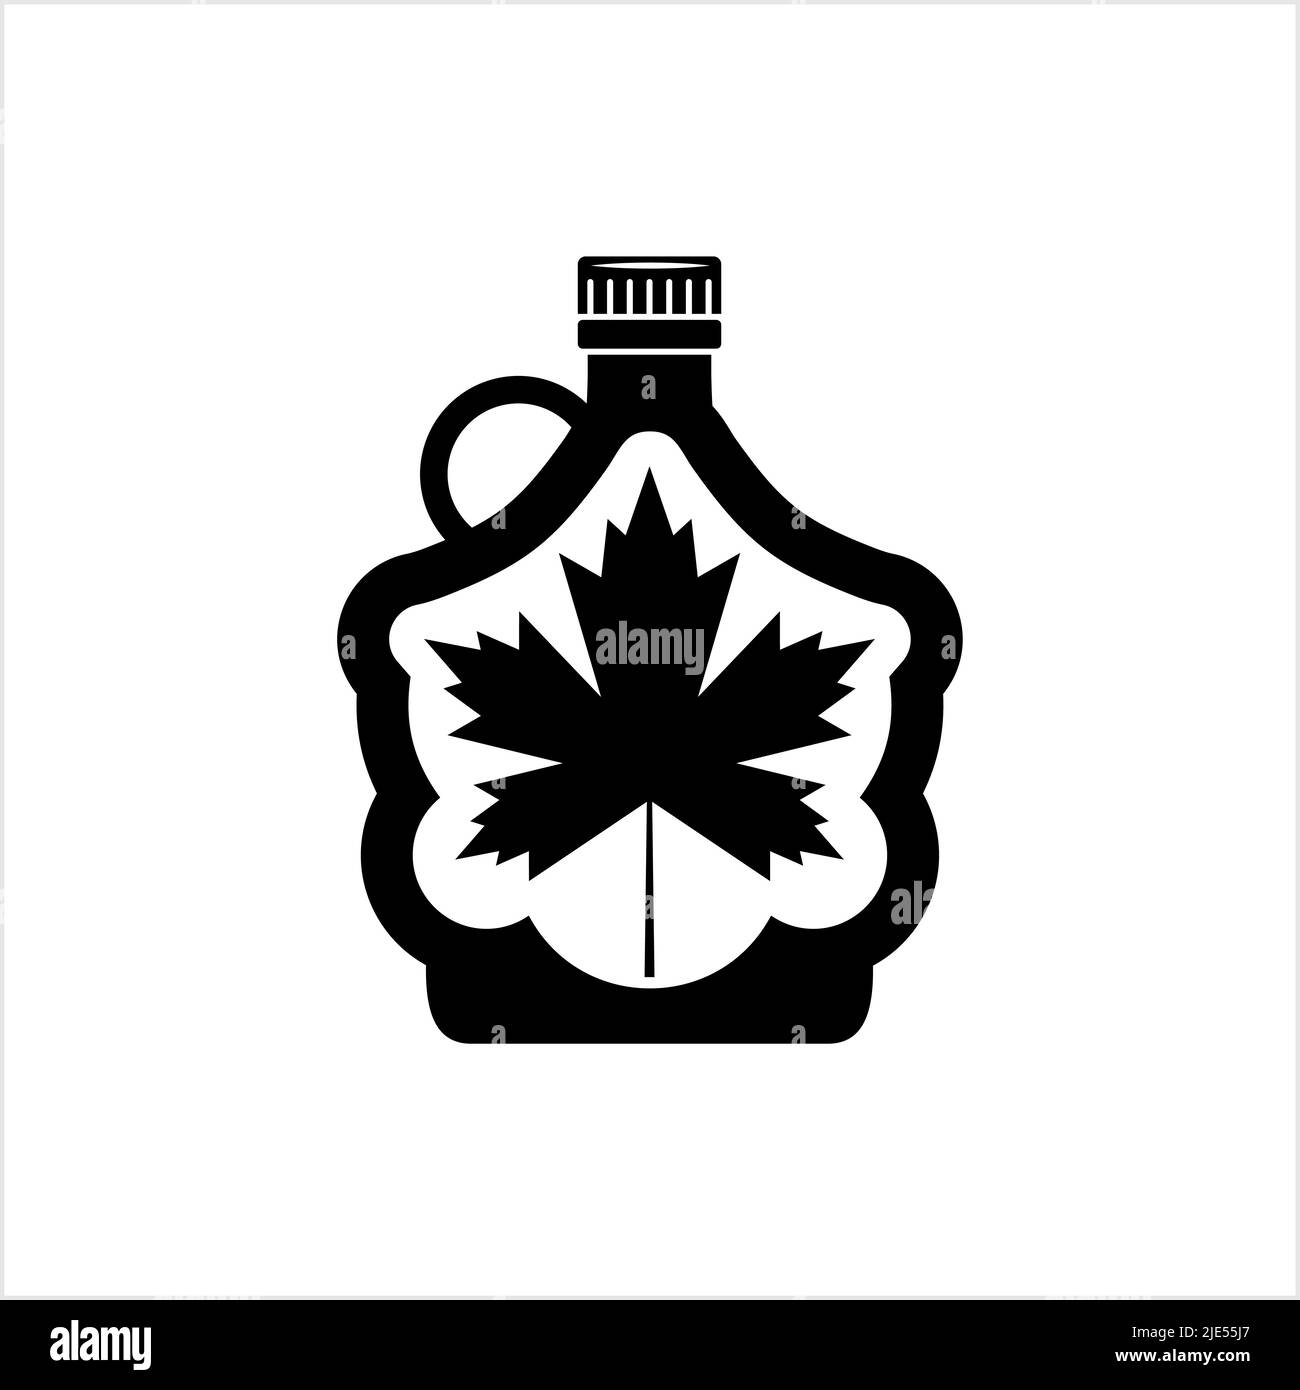 Maple Syrup Icon, Bottle Of Maple Tree Syrup Vector Art Illustration Stock Vector